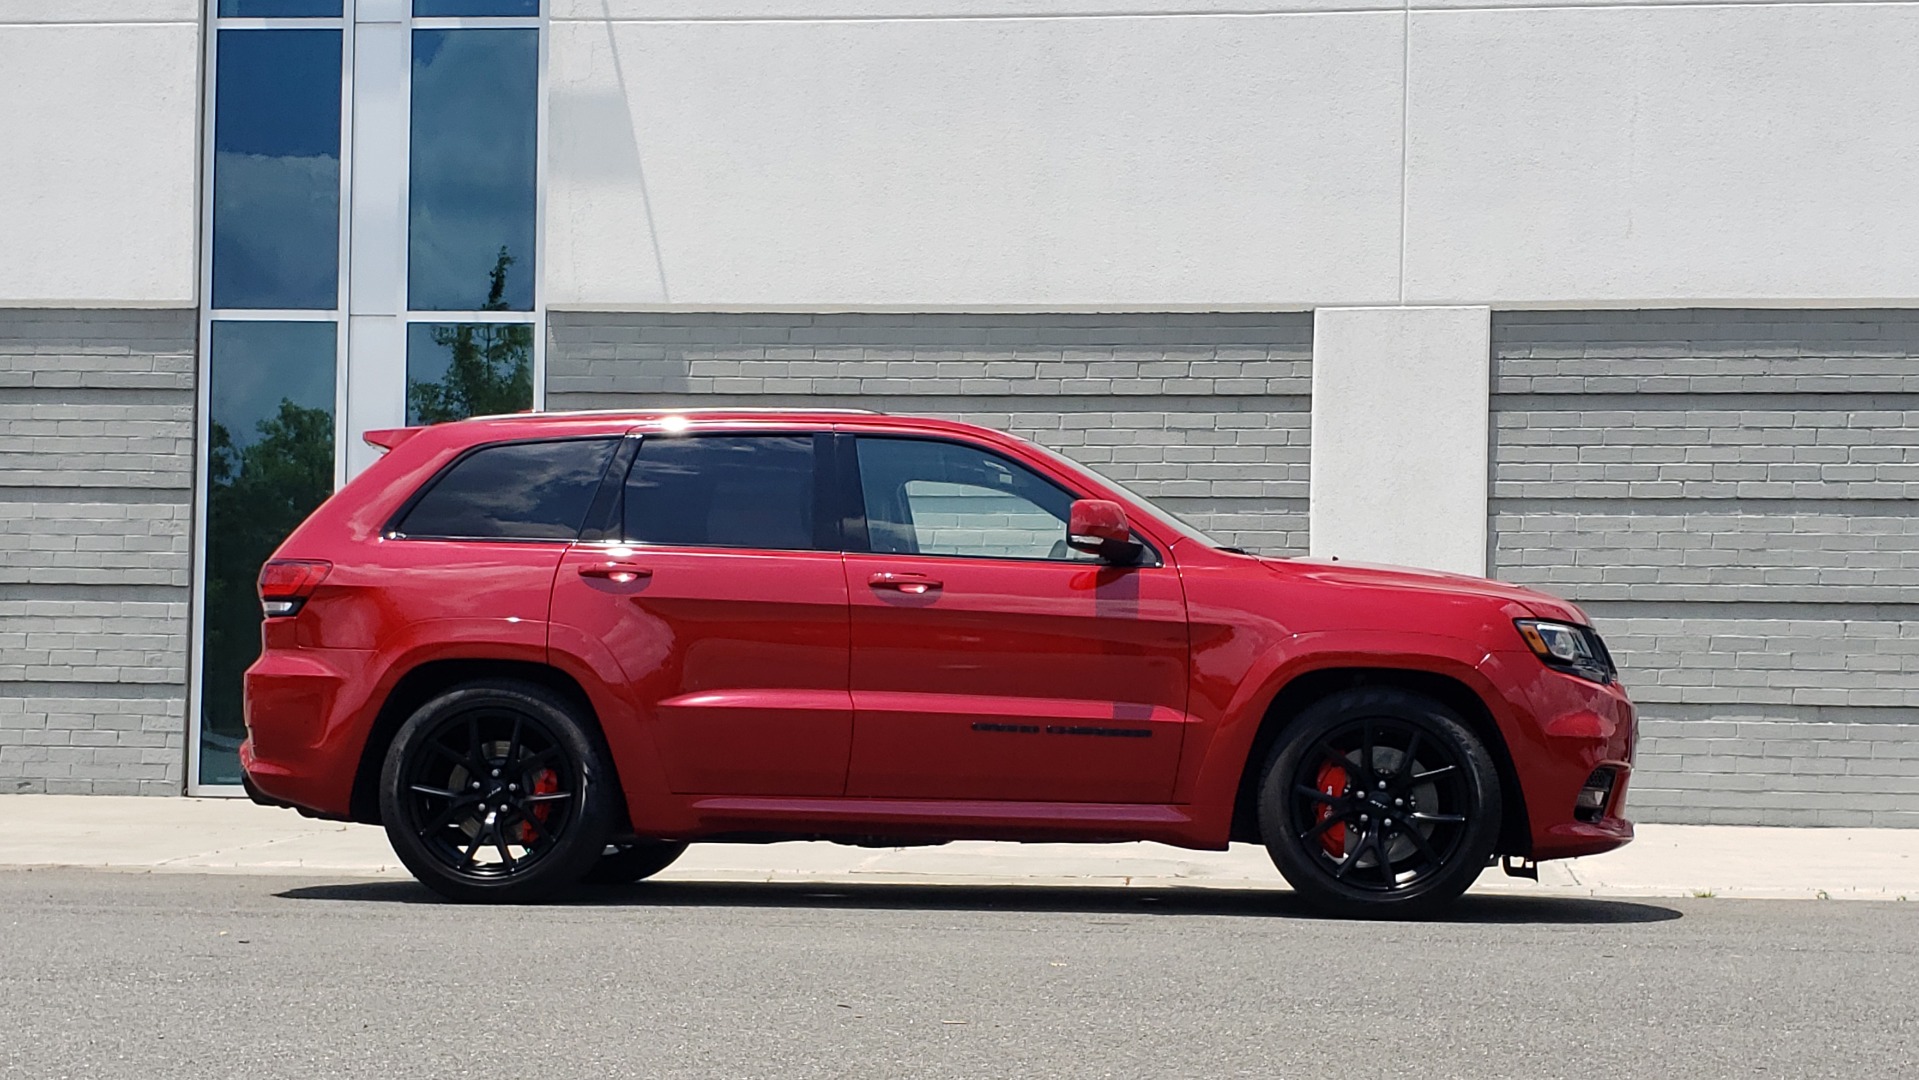 Used 2018 Jeep GRAND CHEROKEE SRT 4X4 / 6.4L HEMI (475HP) / NAV / SUNROOF / H/K SND / REARVIEW for sale Sold at Formula Imports in Charlotte NC 28227 13